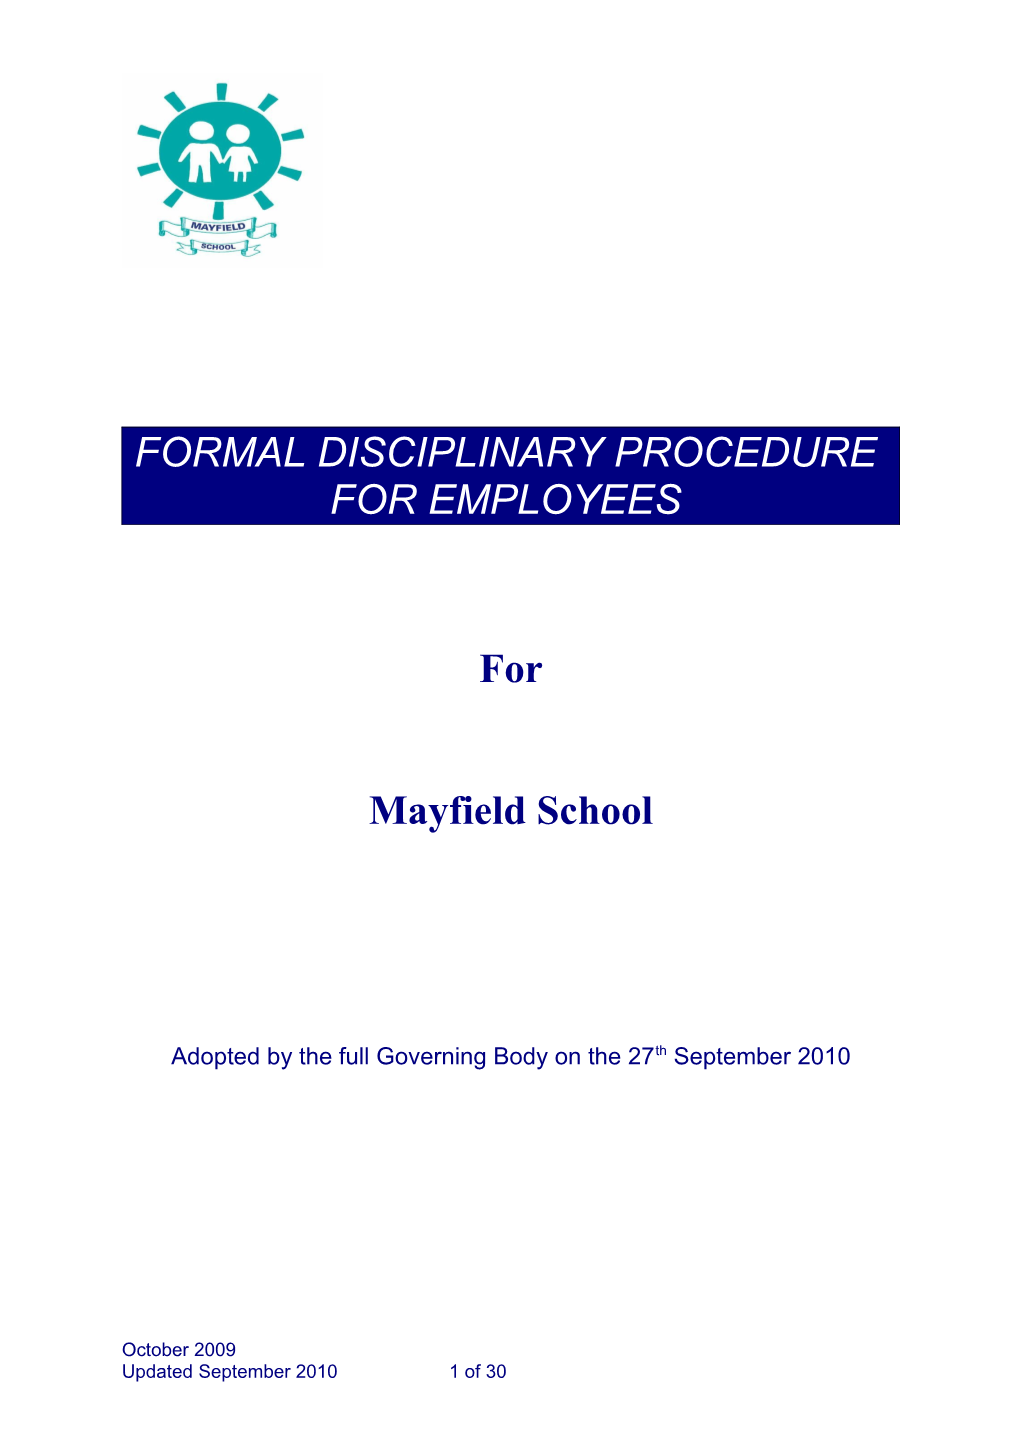 6 Formal Disciplinary and Grievance Procedures